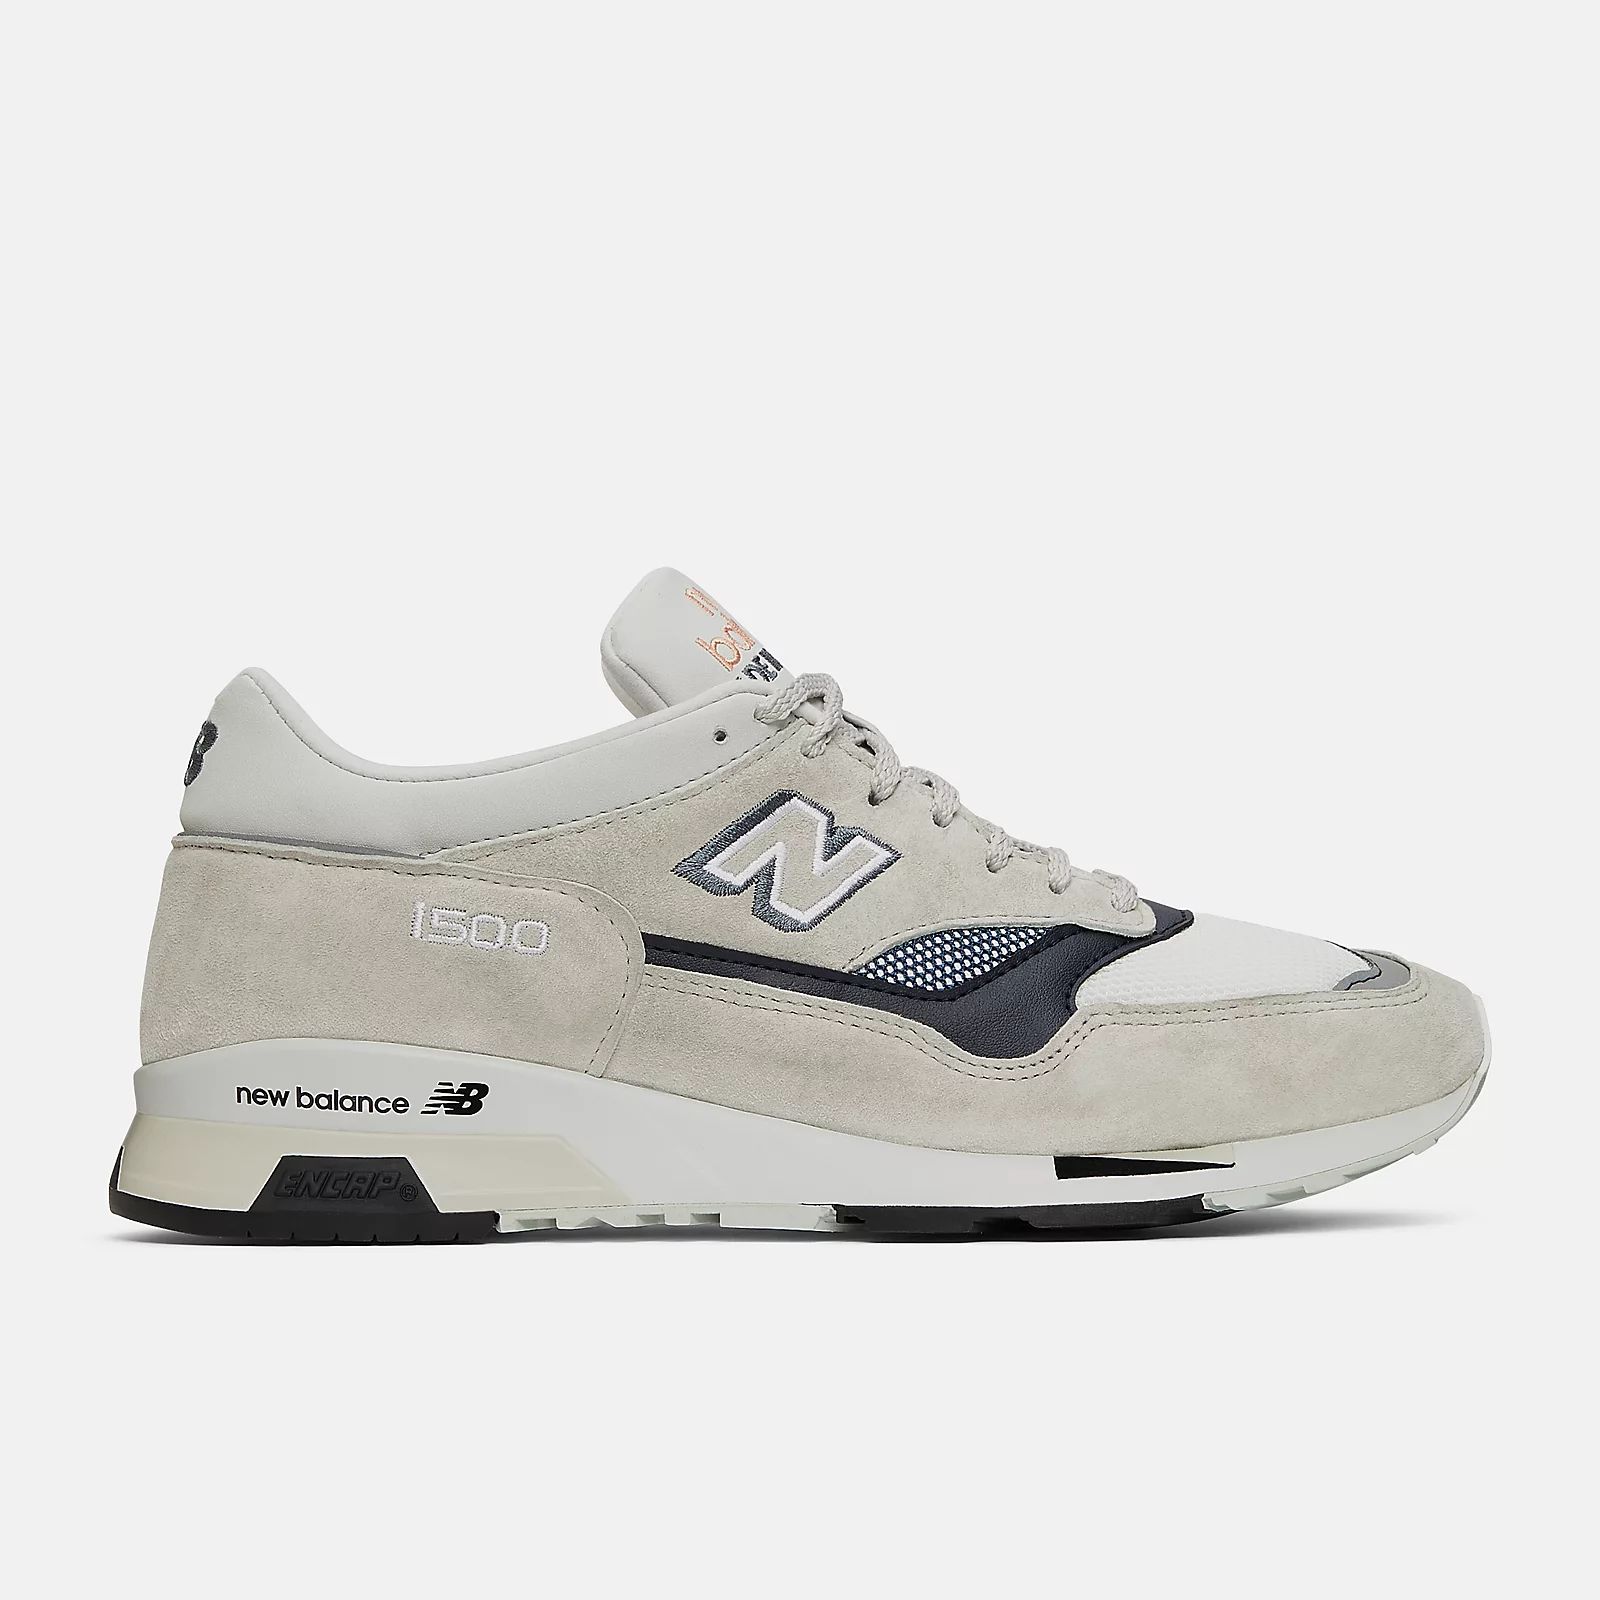 Off White with White and Black | New Balance Athletics, Inc.